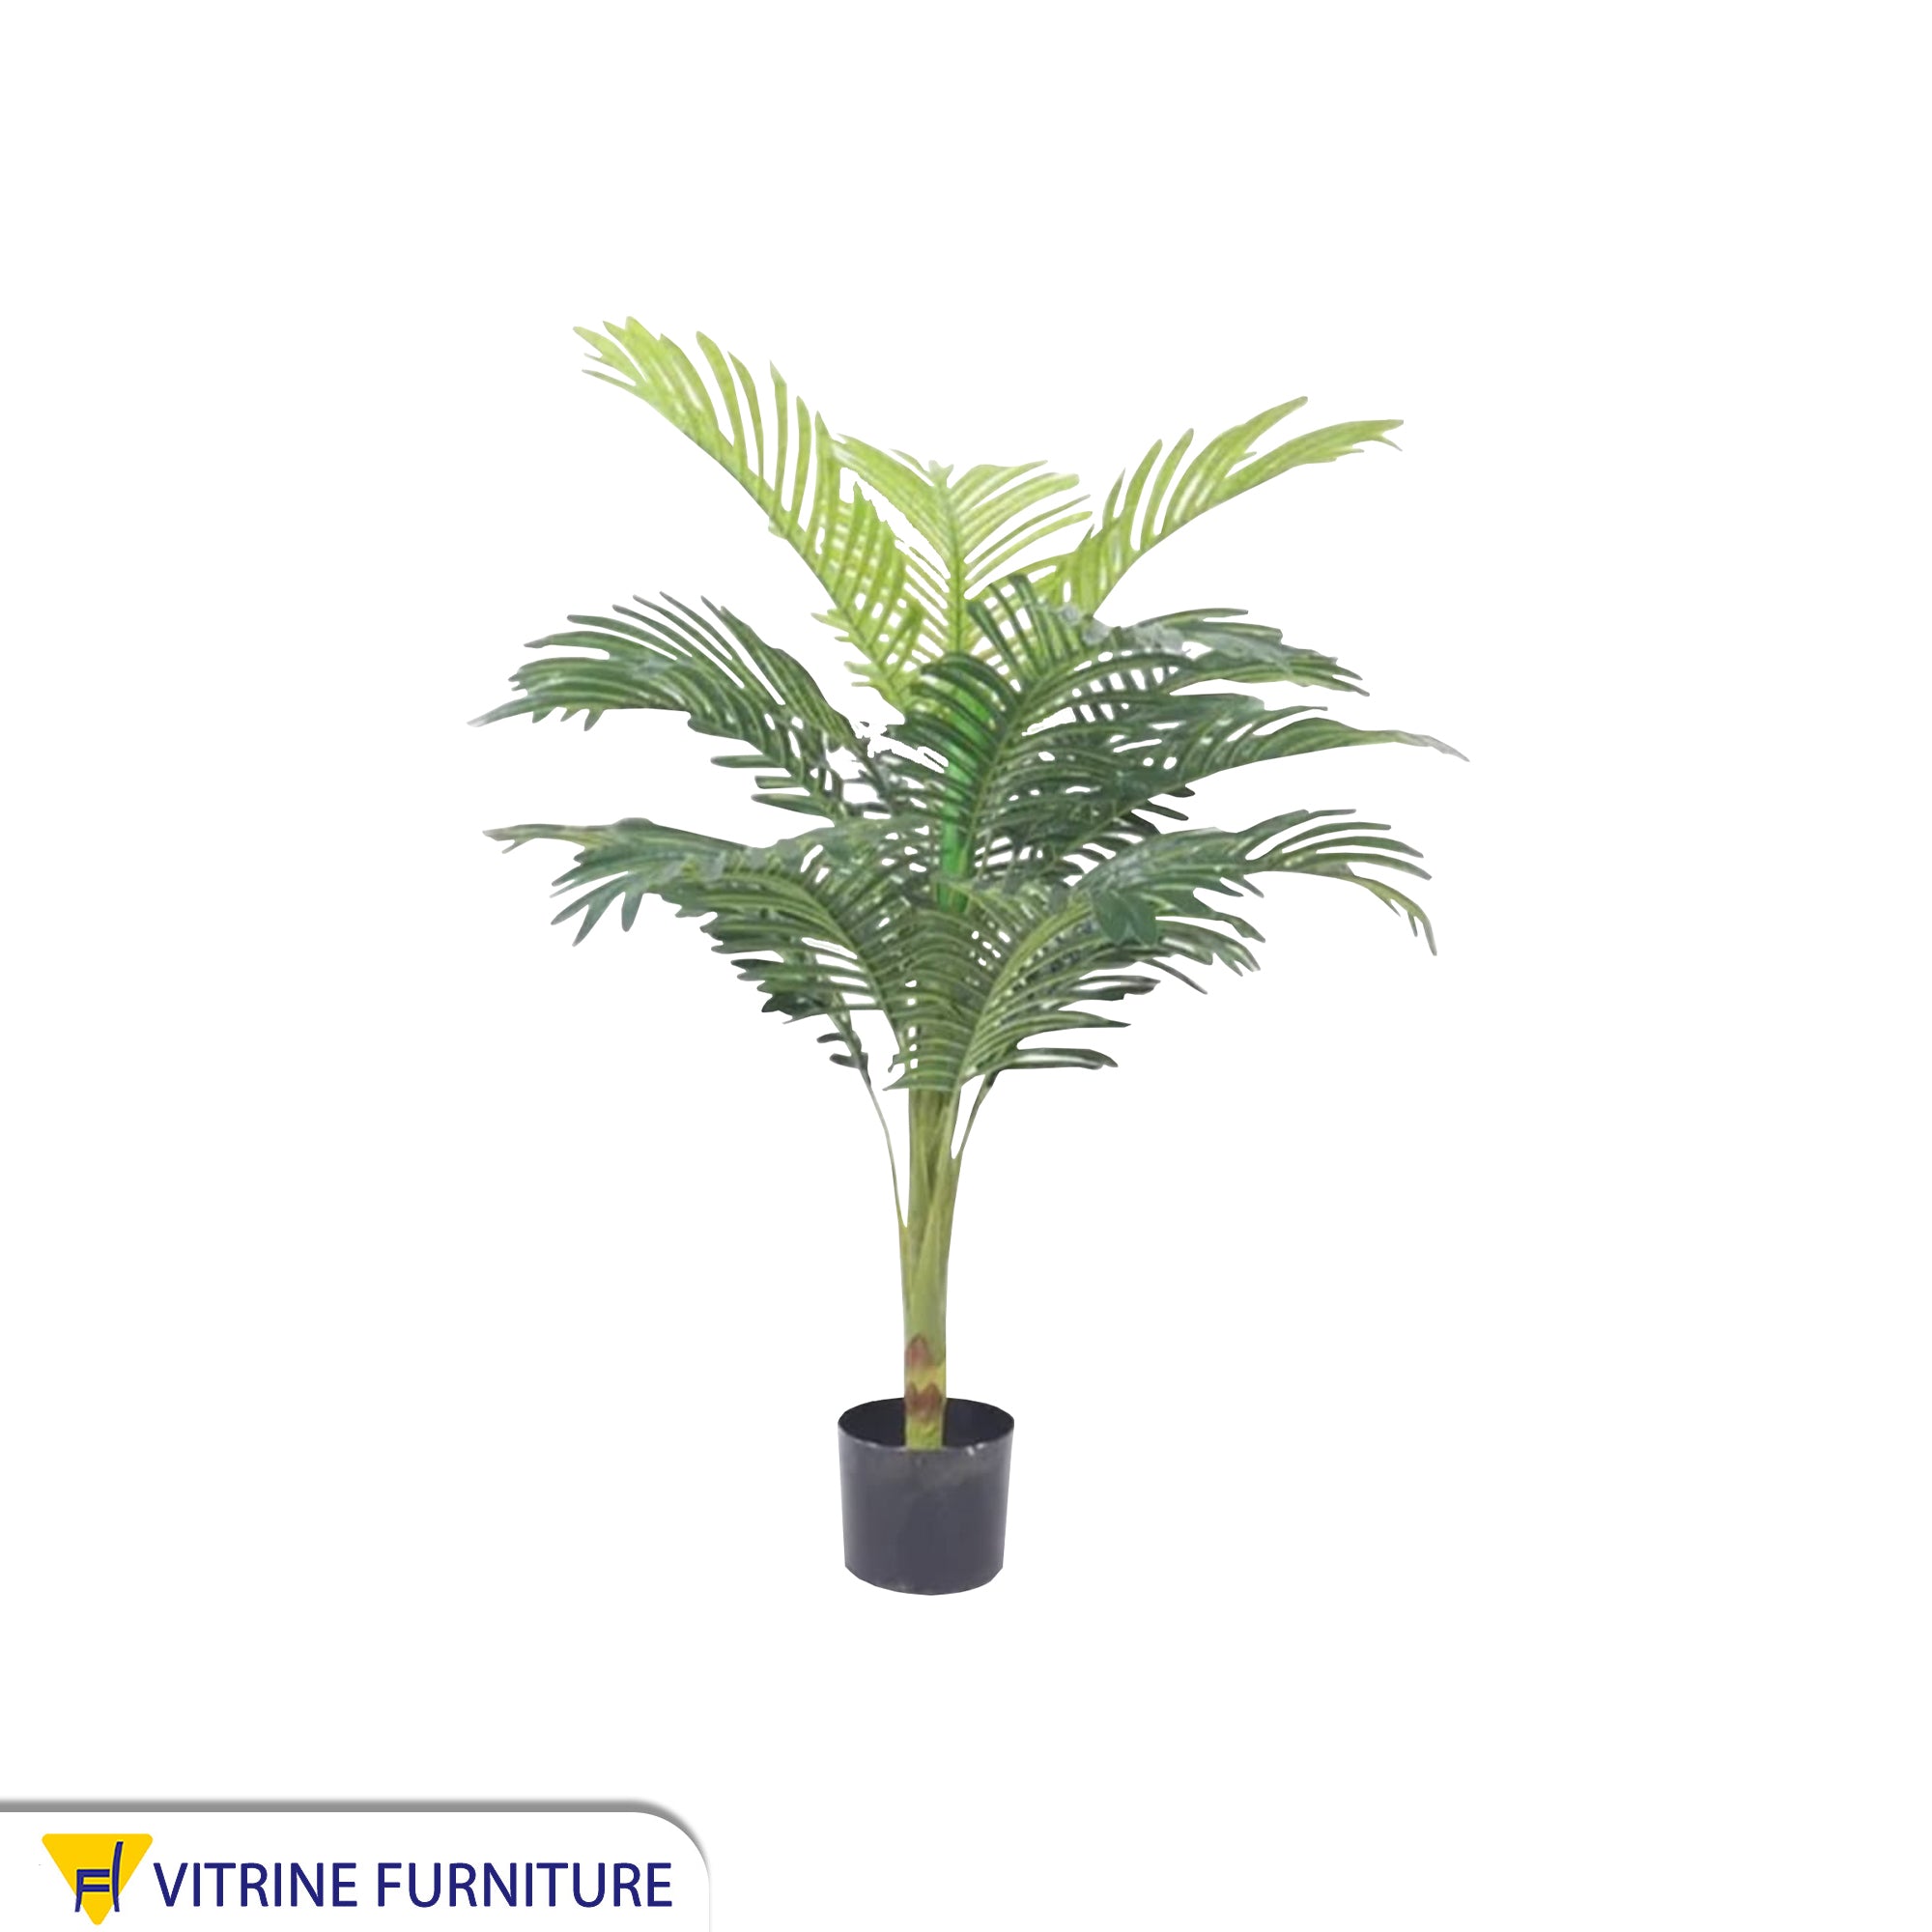 A pot for an areca plant with split leaves